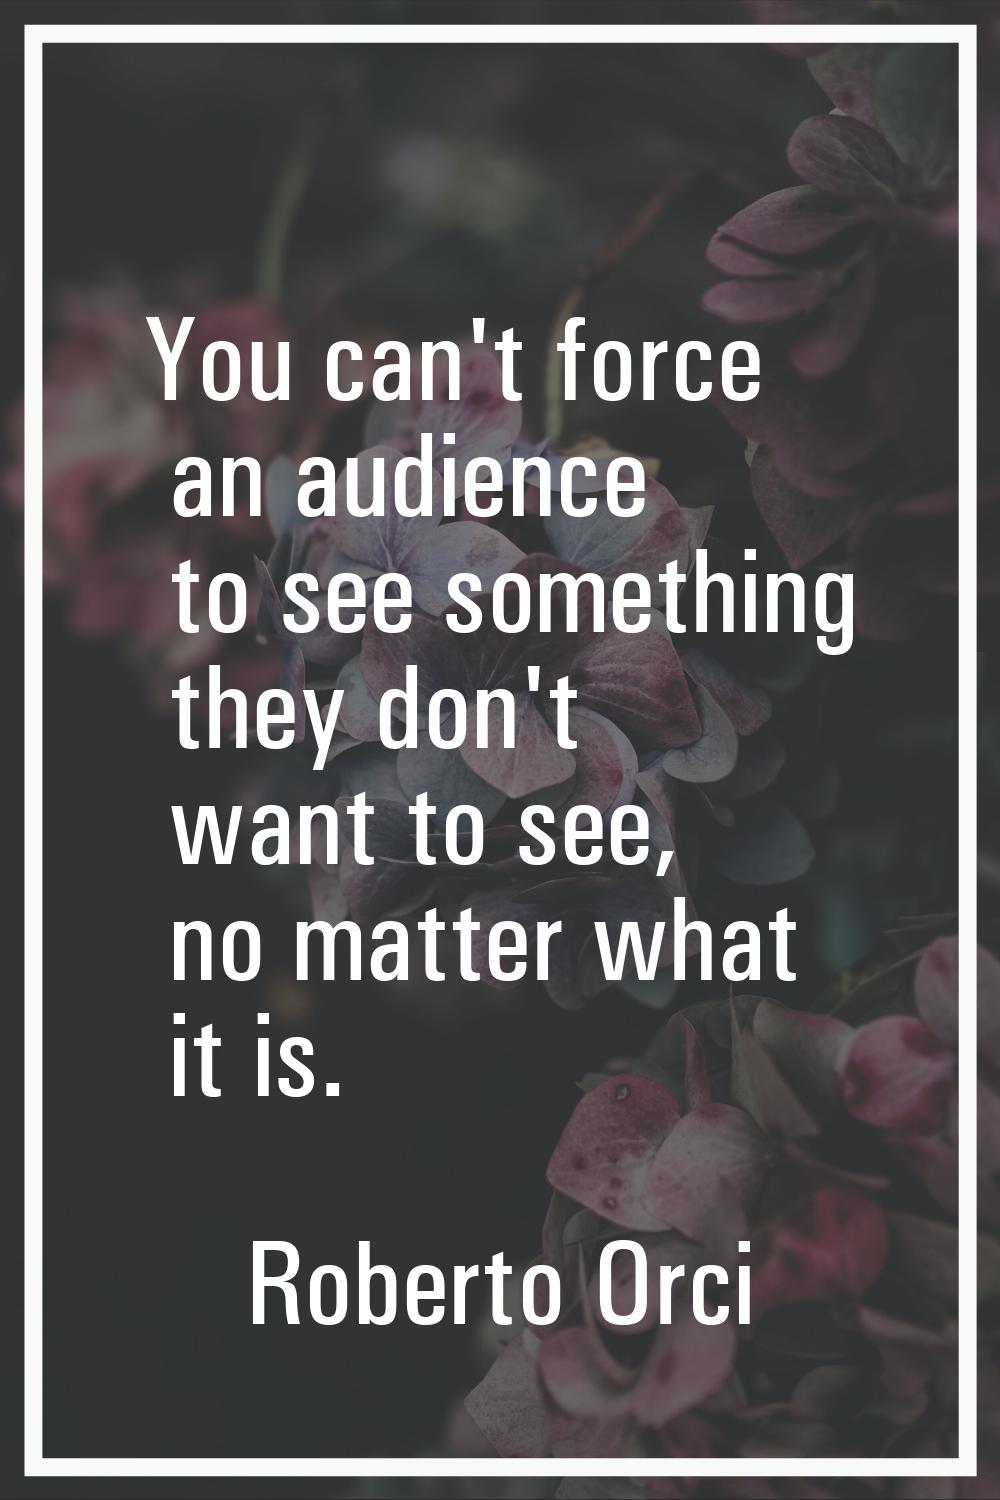 You can't force an audience to see something they don't want to see, no matter what it is.